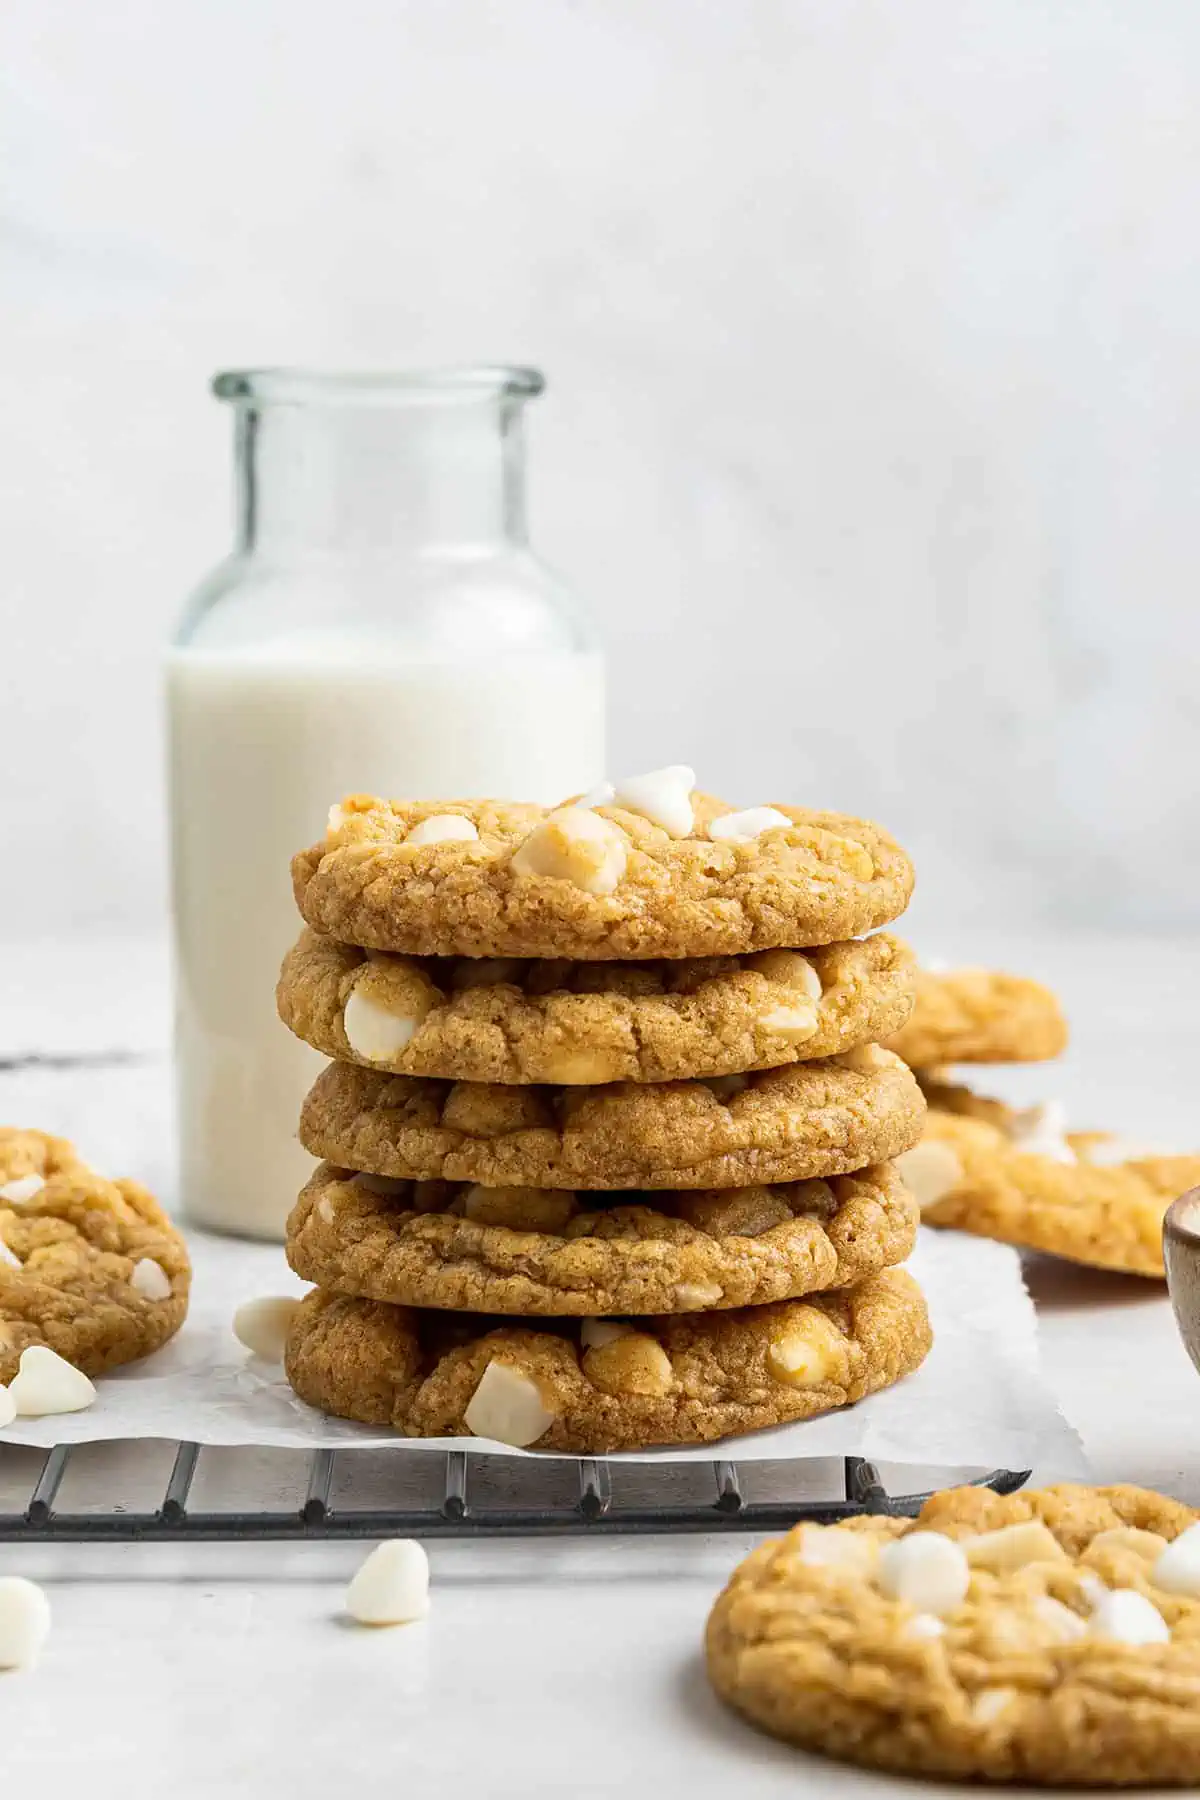 A stack of five cookies with a jar of milk in the background